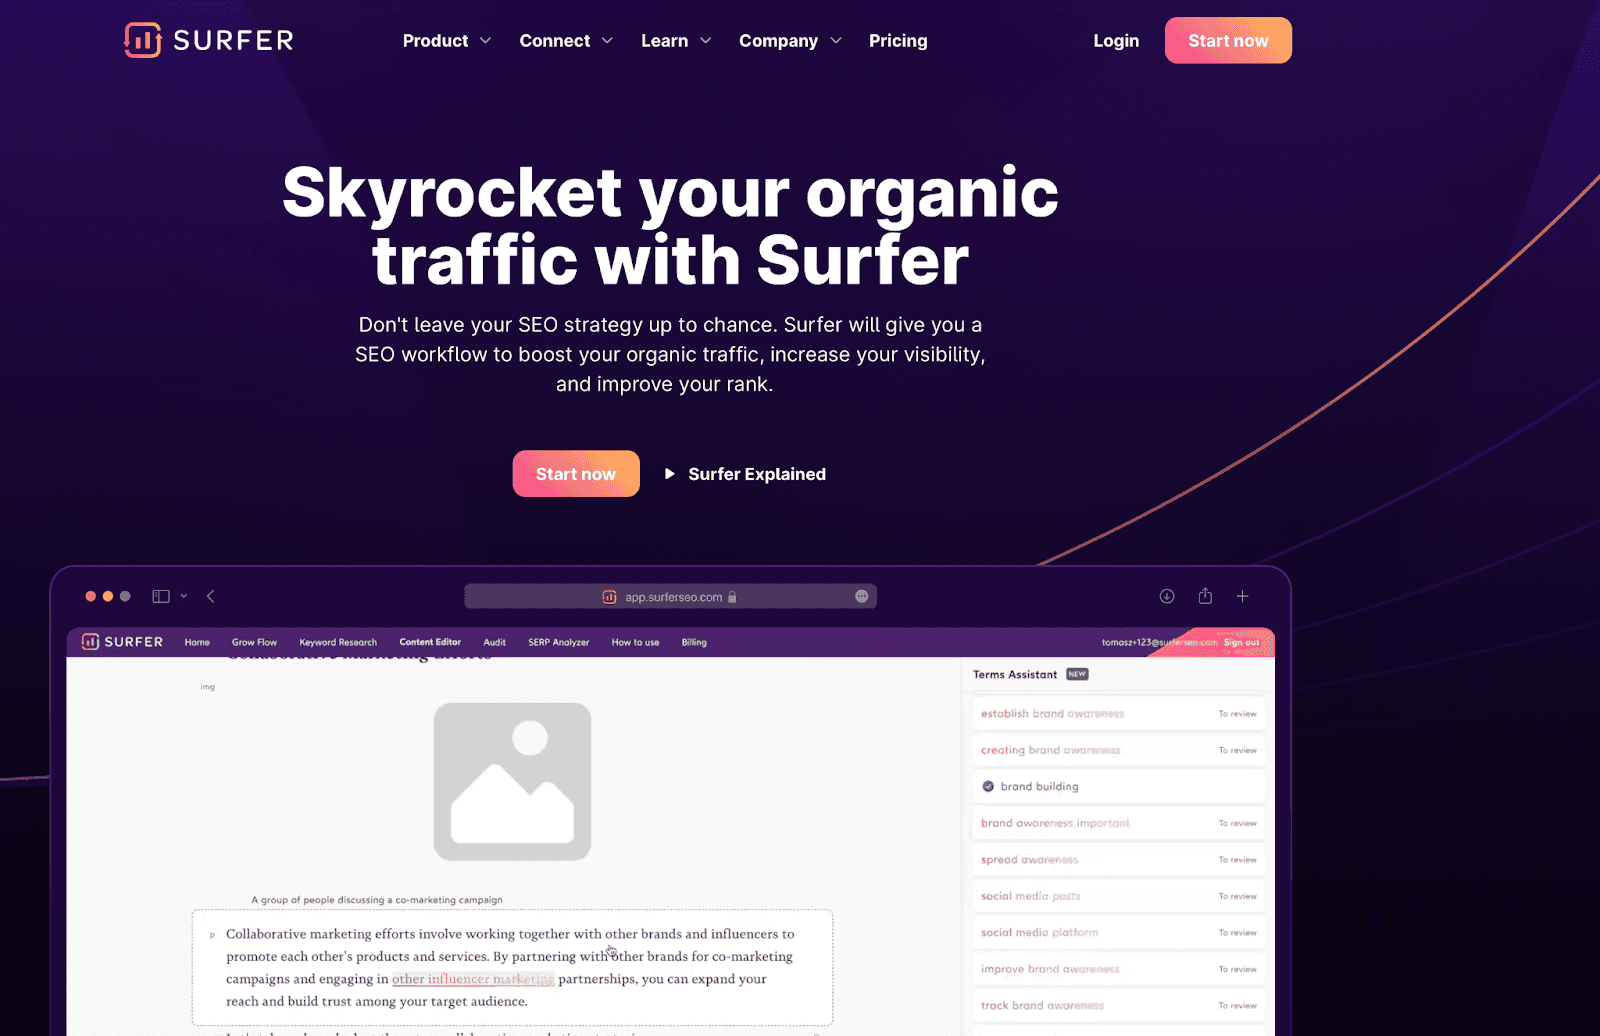 Skyrocket your organic traffic with Surfer